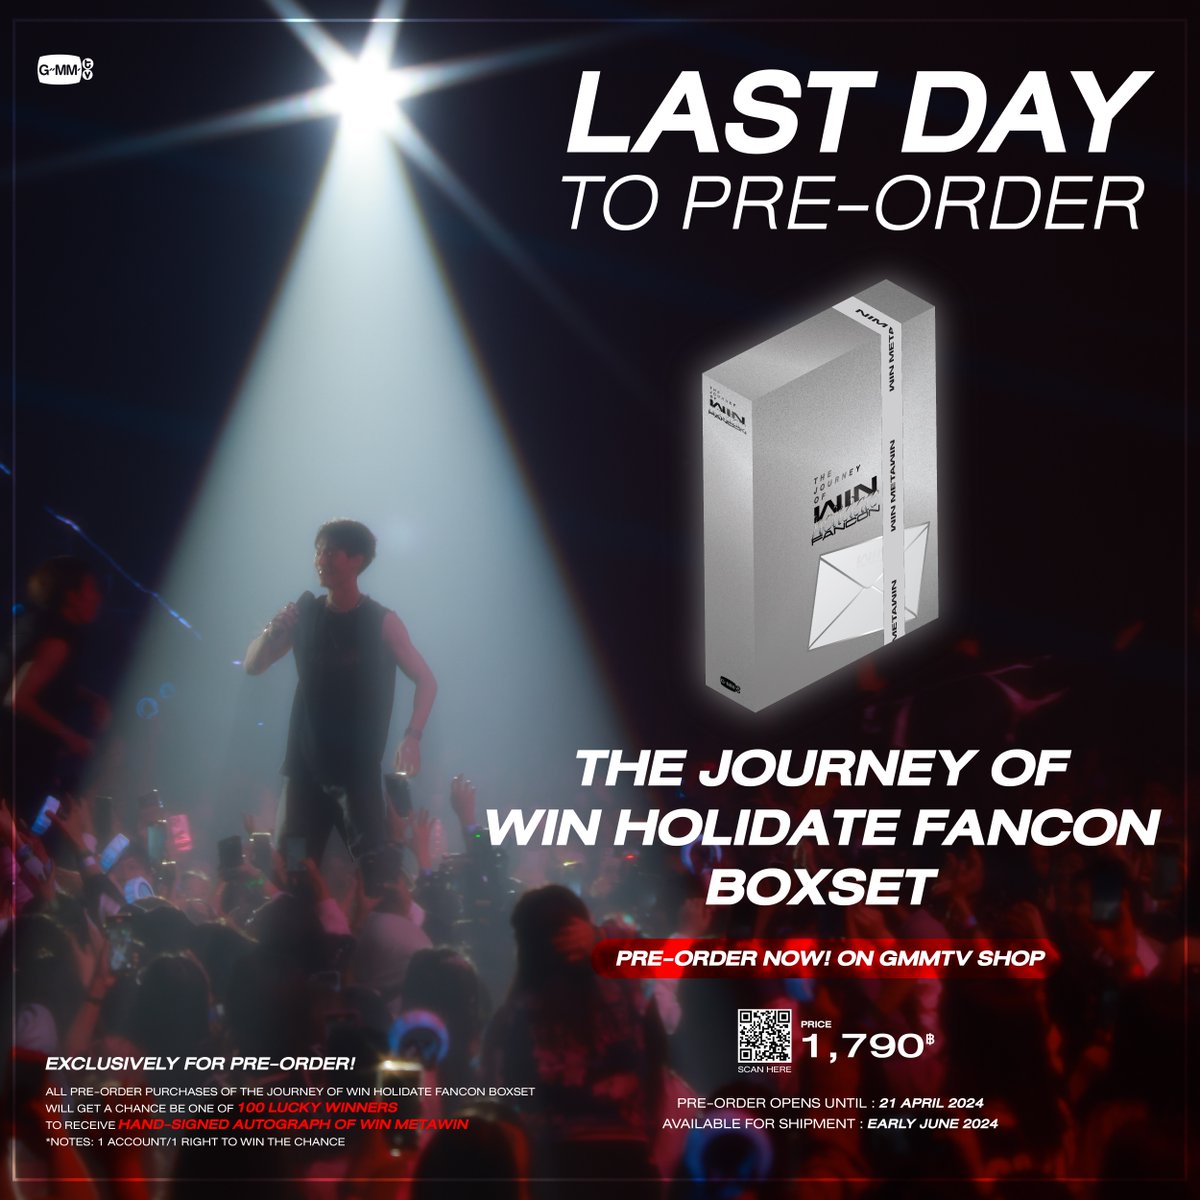 Today is the last day to pre-order the THE JOURNEY OF WIN HOLIDATE FANCON BOXSET. Let’s get yours now. gmm-tv.com/shop/the-journ… #WinHolidateFancon #winmetawin #GMMTV